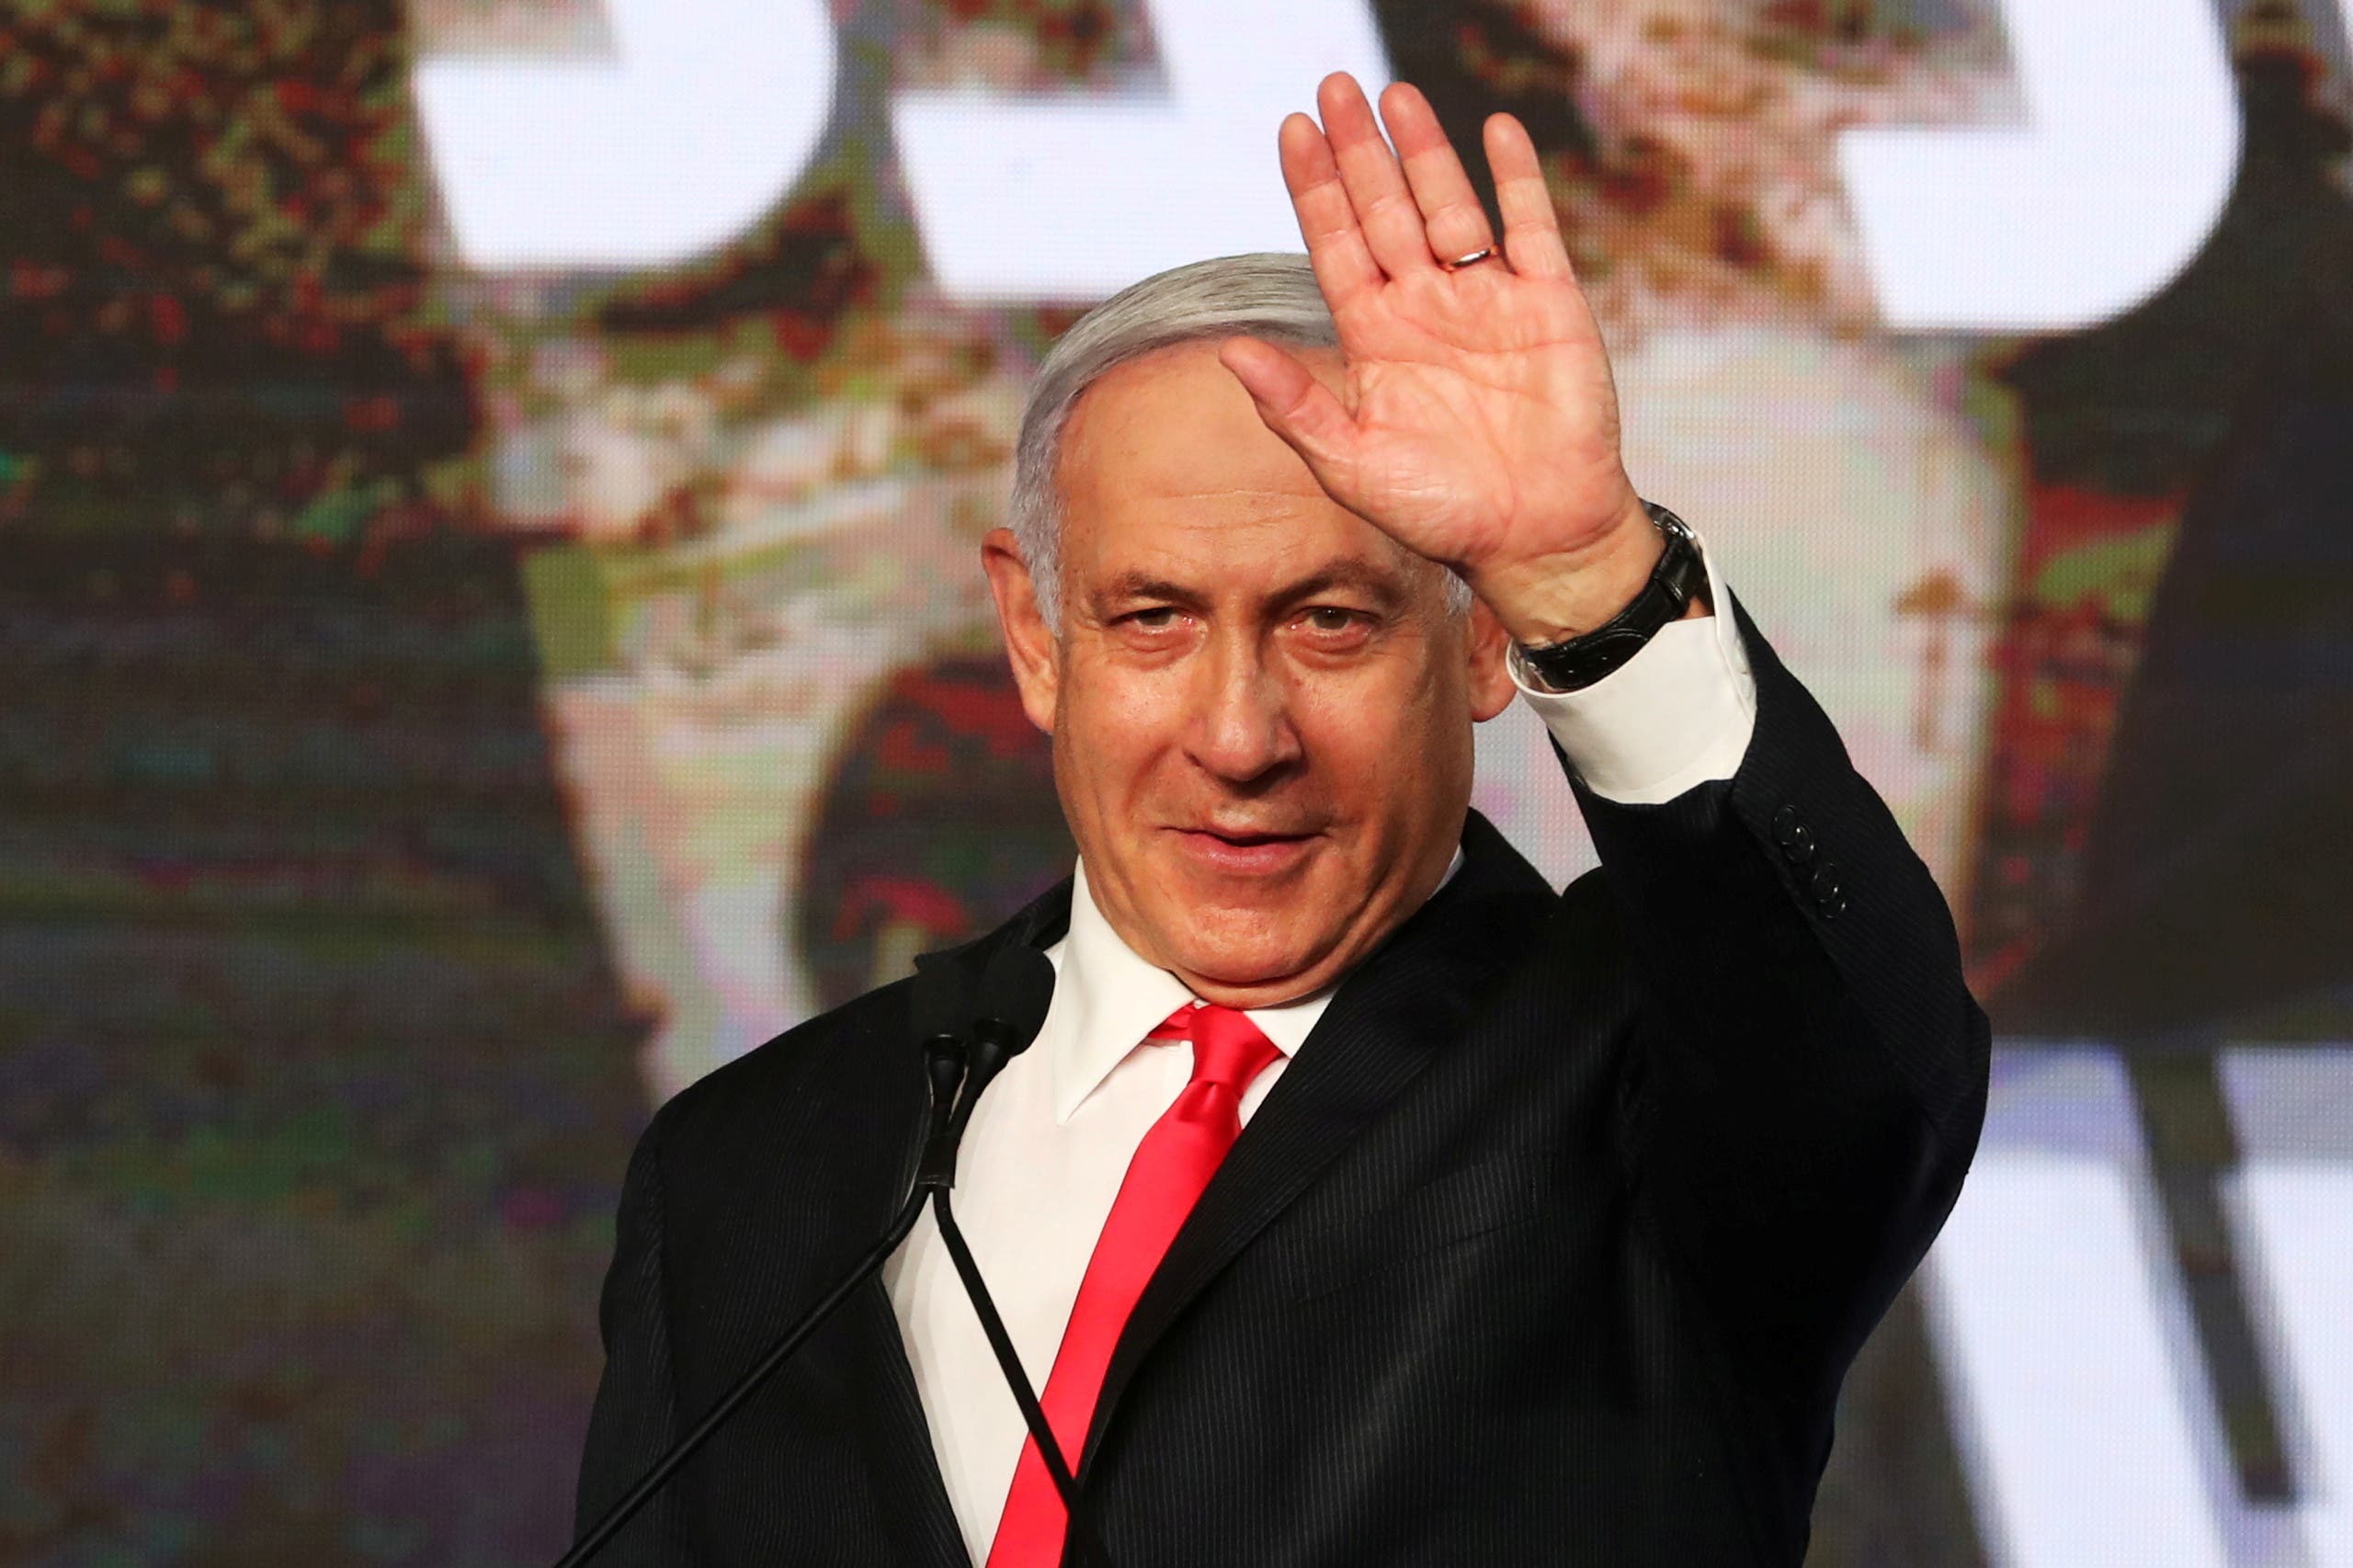 Israeli Prime Minister Benjamin Netanyahu gestures as he delivers a speech to supporters following the announcement of exit polls in Israel's general election at his Likud party headquarters in Jerusalem March 24, 2021. (Reuters)